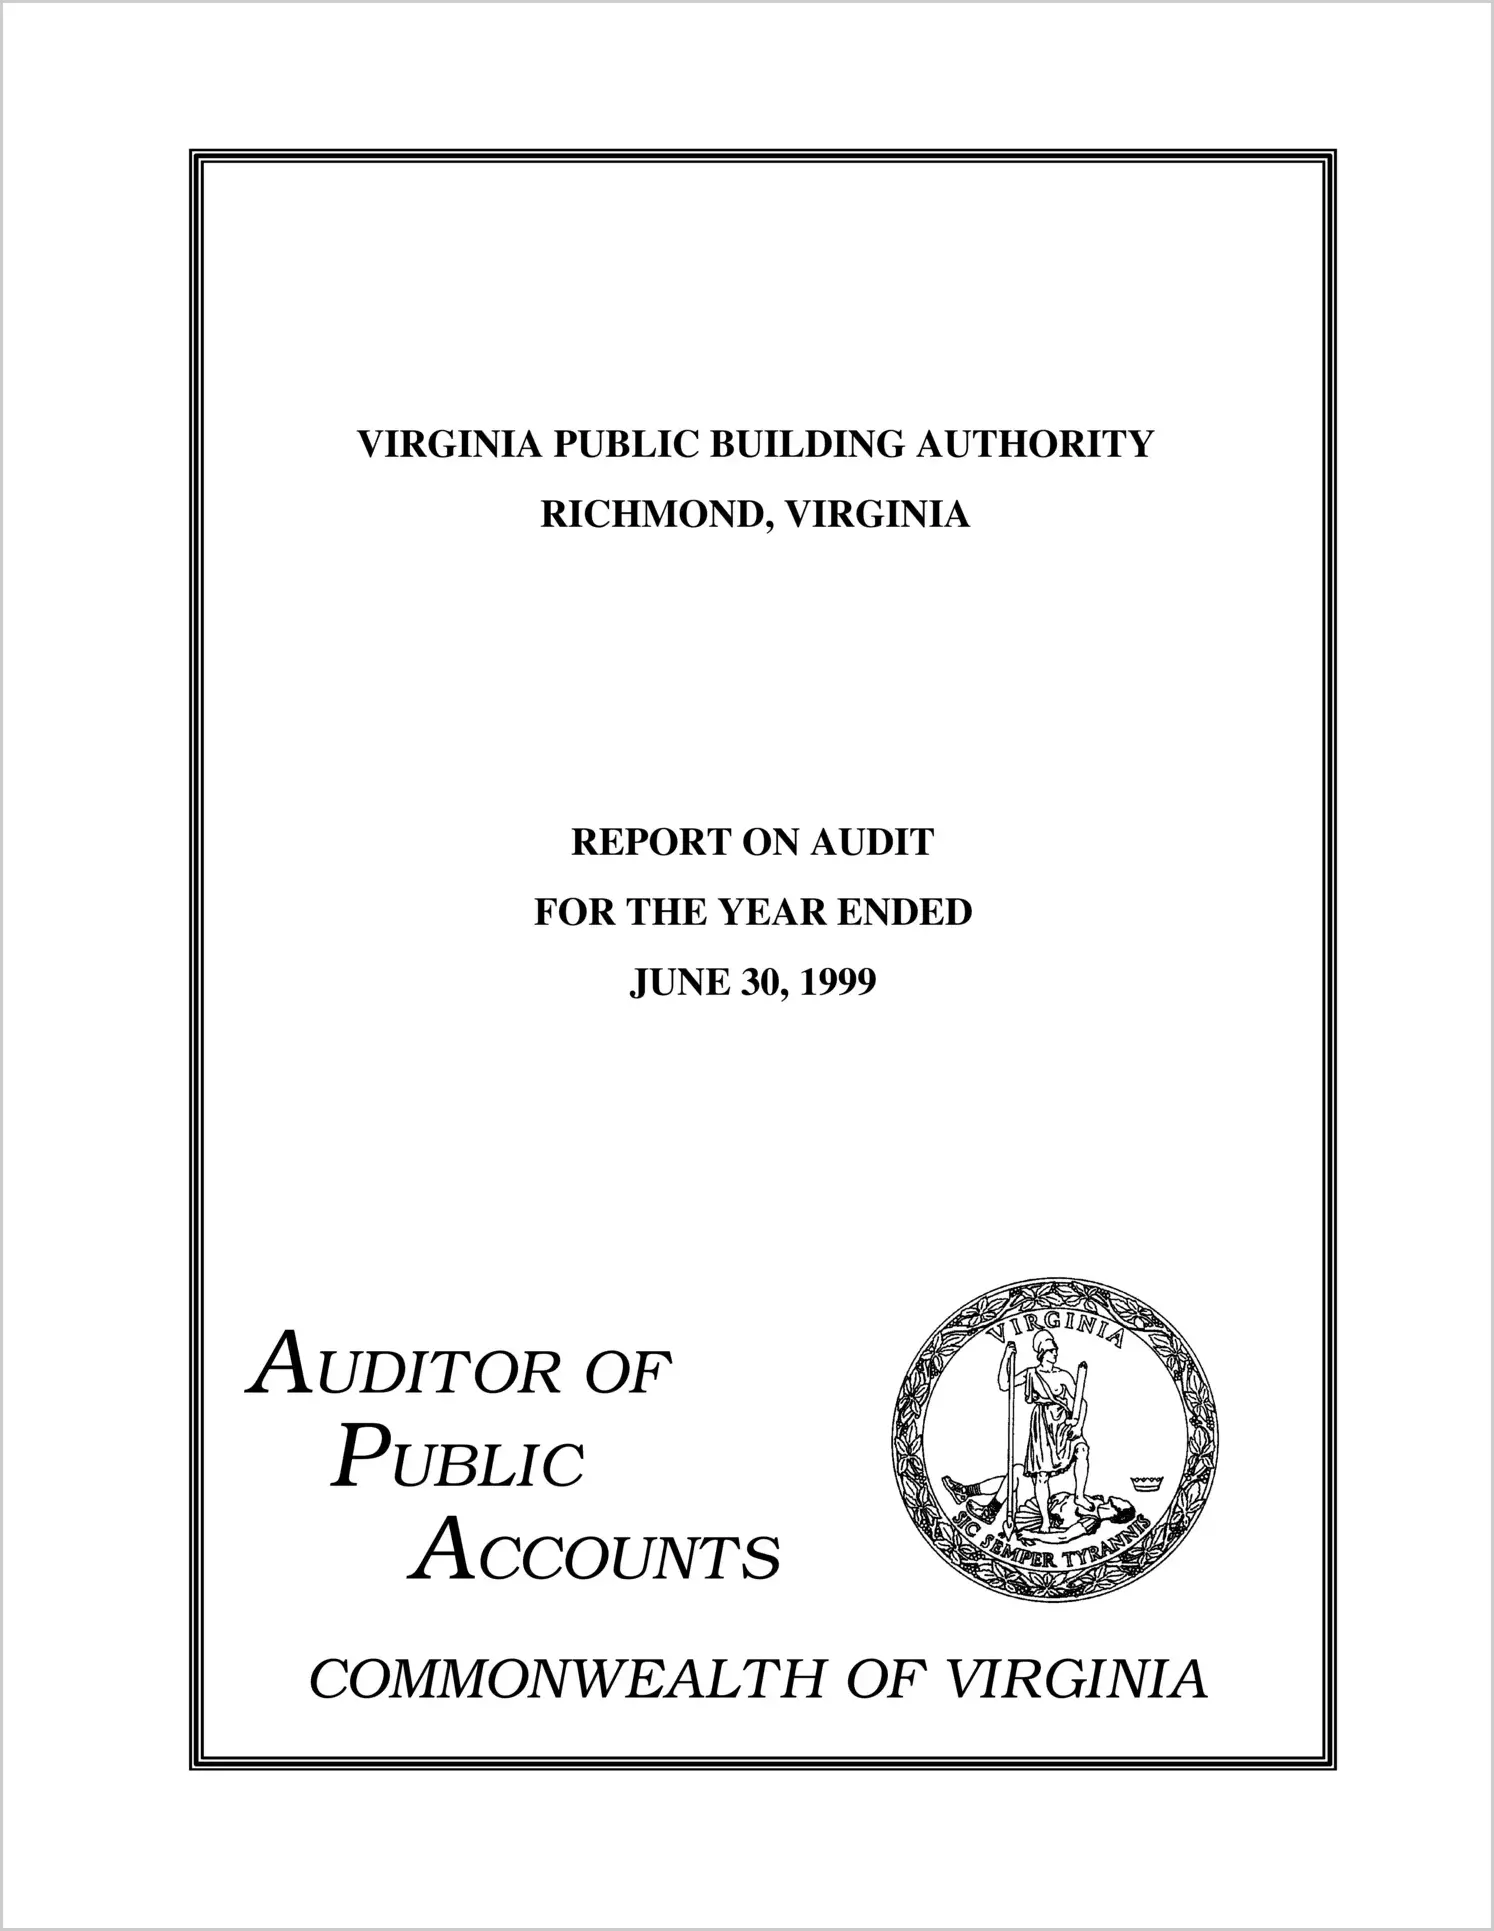 Virginia Public Building Authority for the year ended June 30, 1999